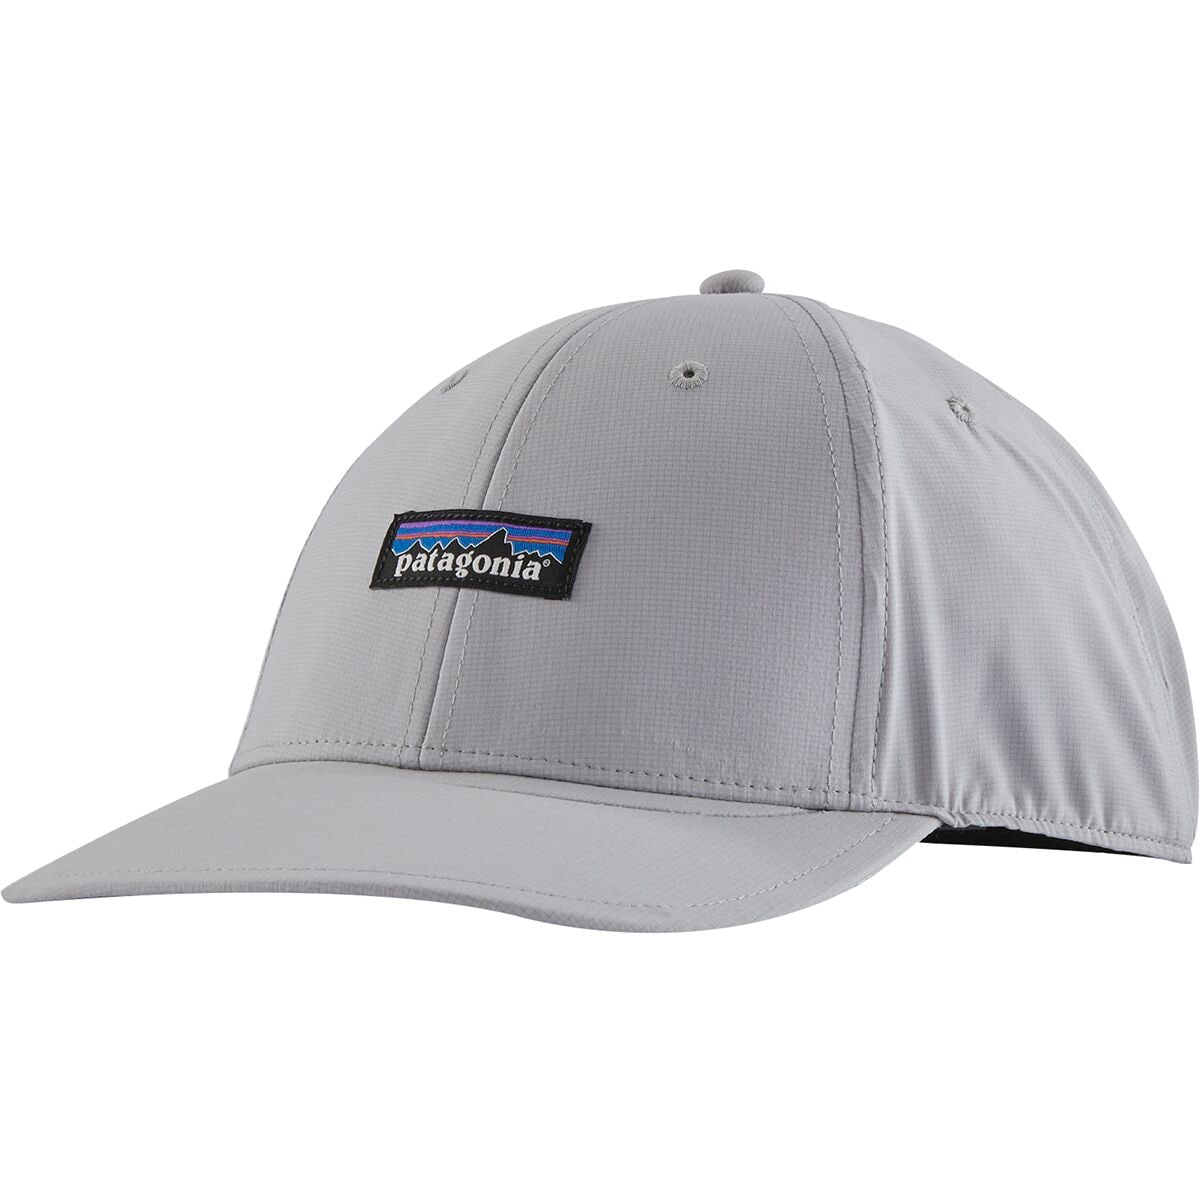 Patagonia Airshed Cap - Accessories | Backcountry